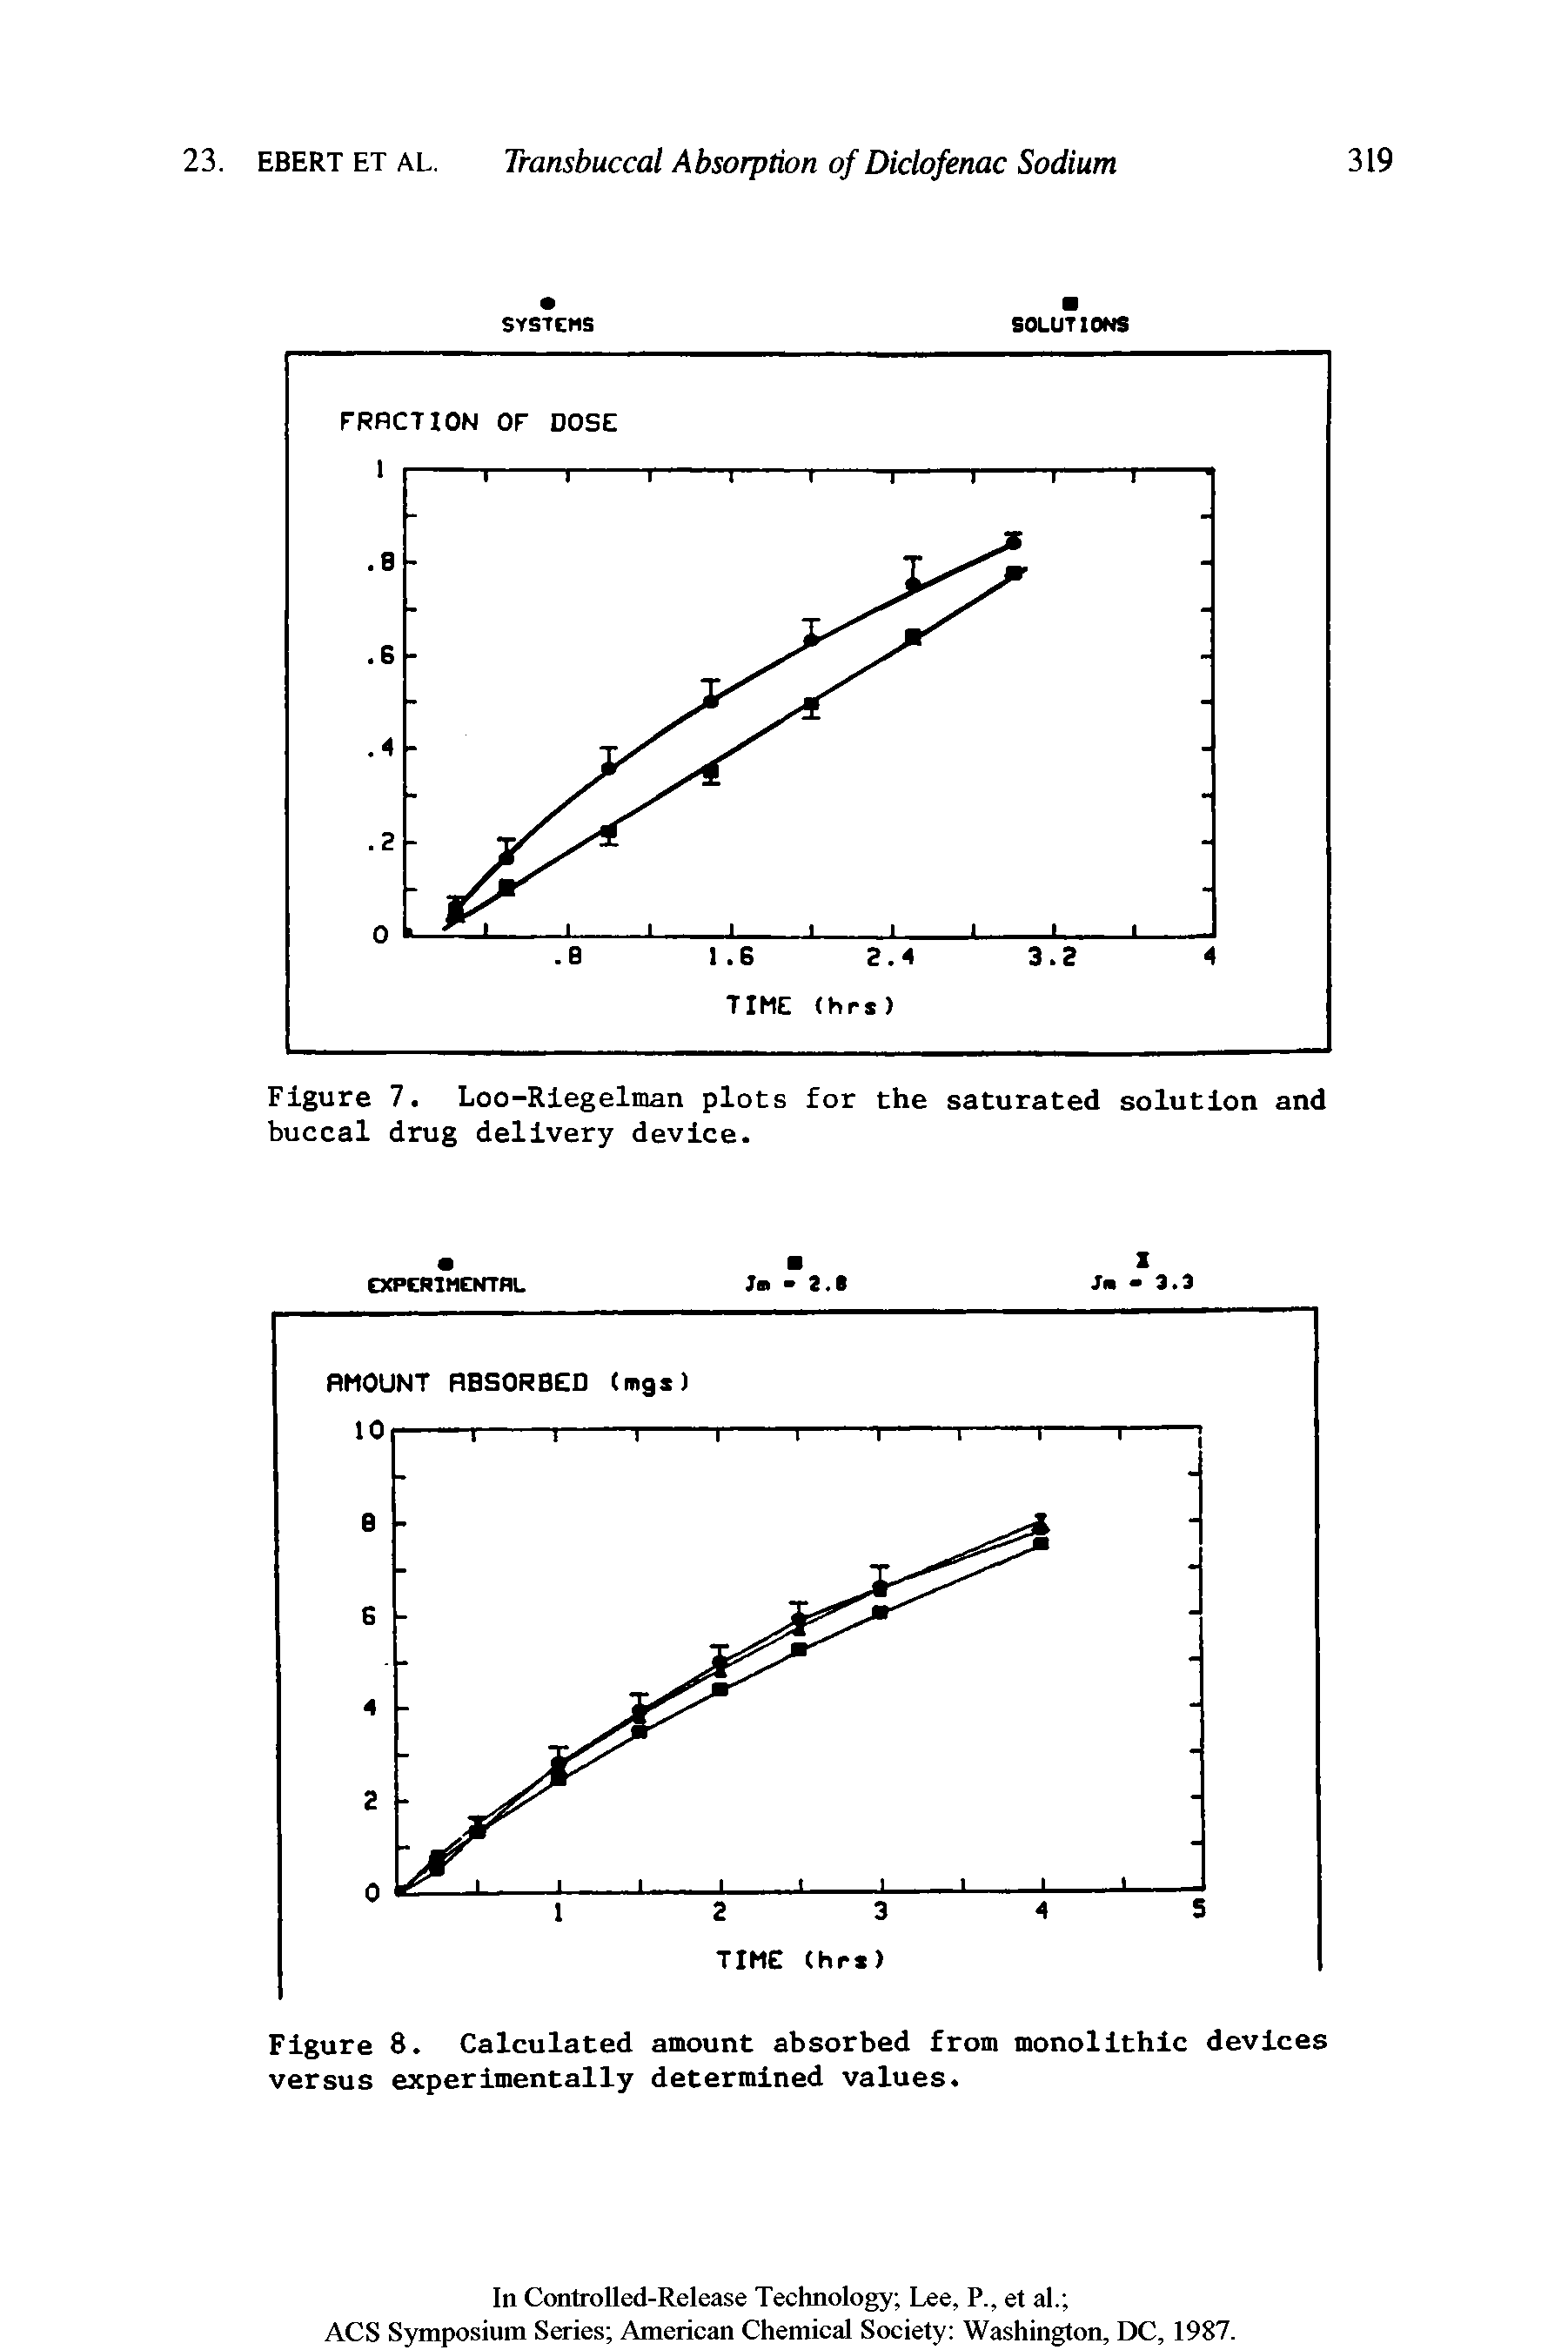 Figure 8. Calculated amount absorbed from monolithic devices versus experimentally determined values.